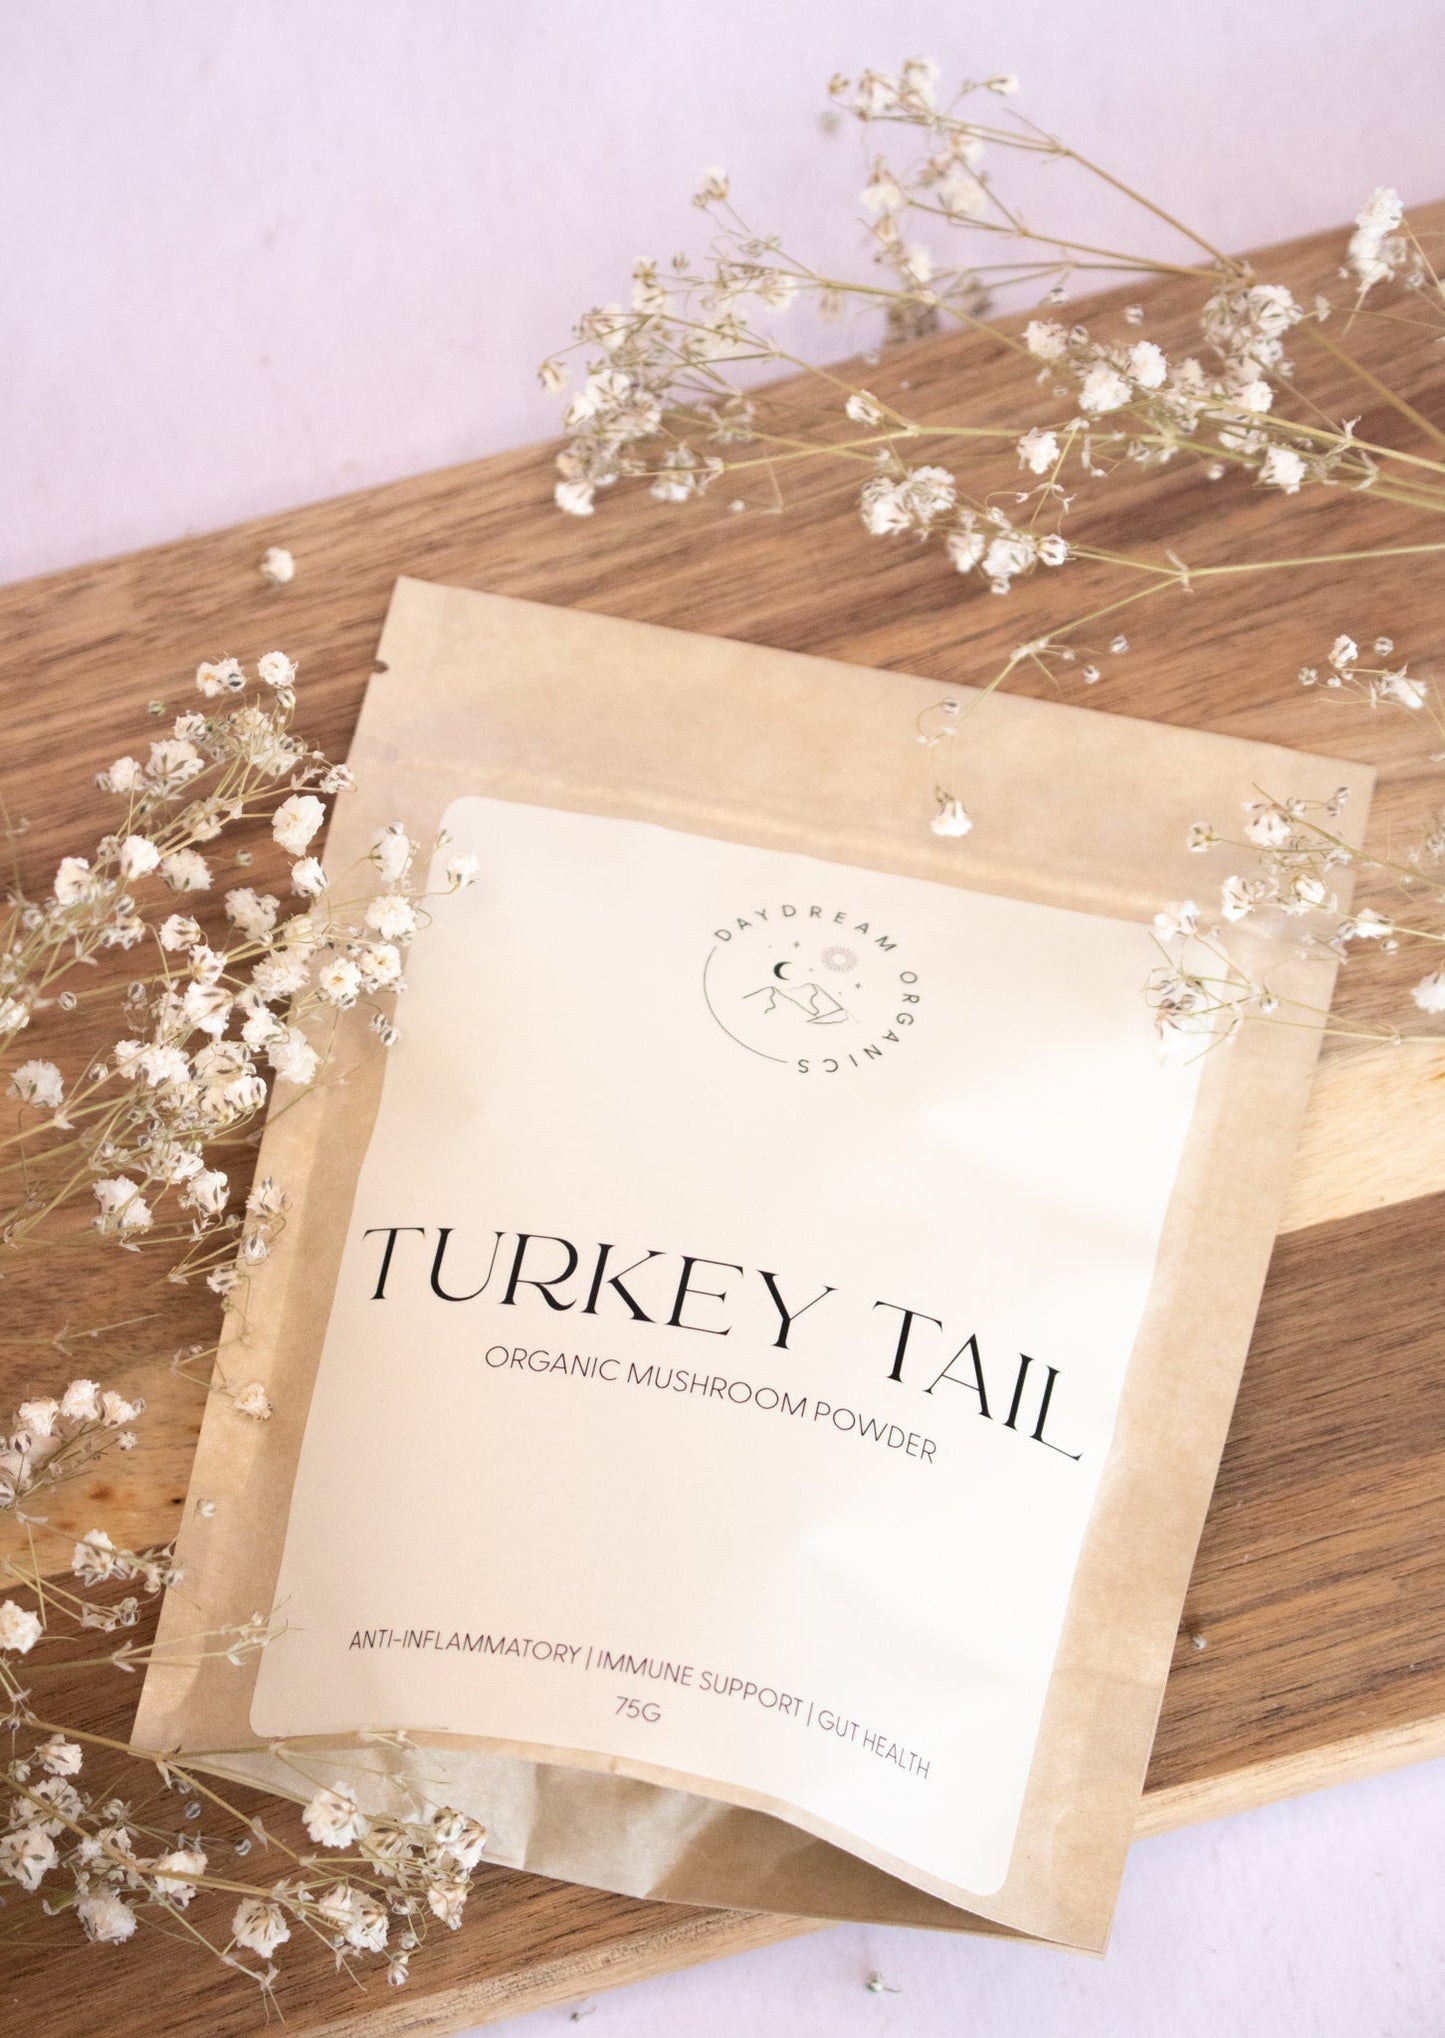 Our organic Turkey Tail mushroom powder can be used to strengthen and modulate the immune system.